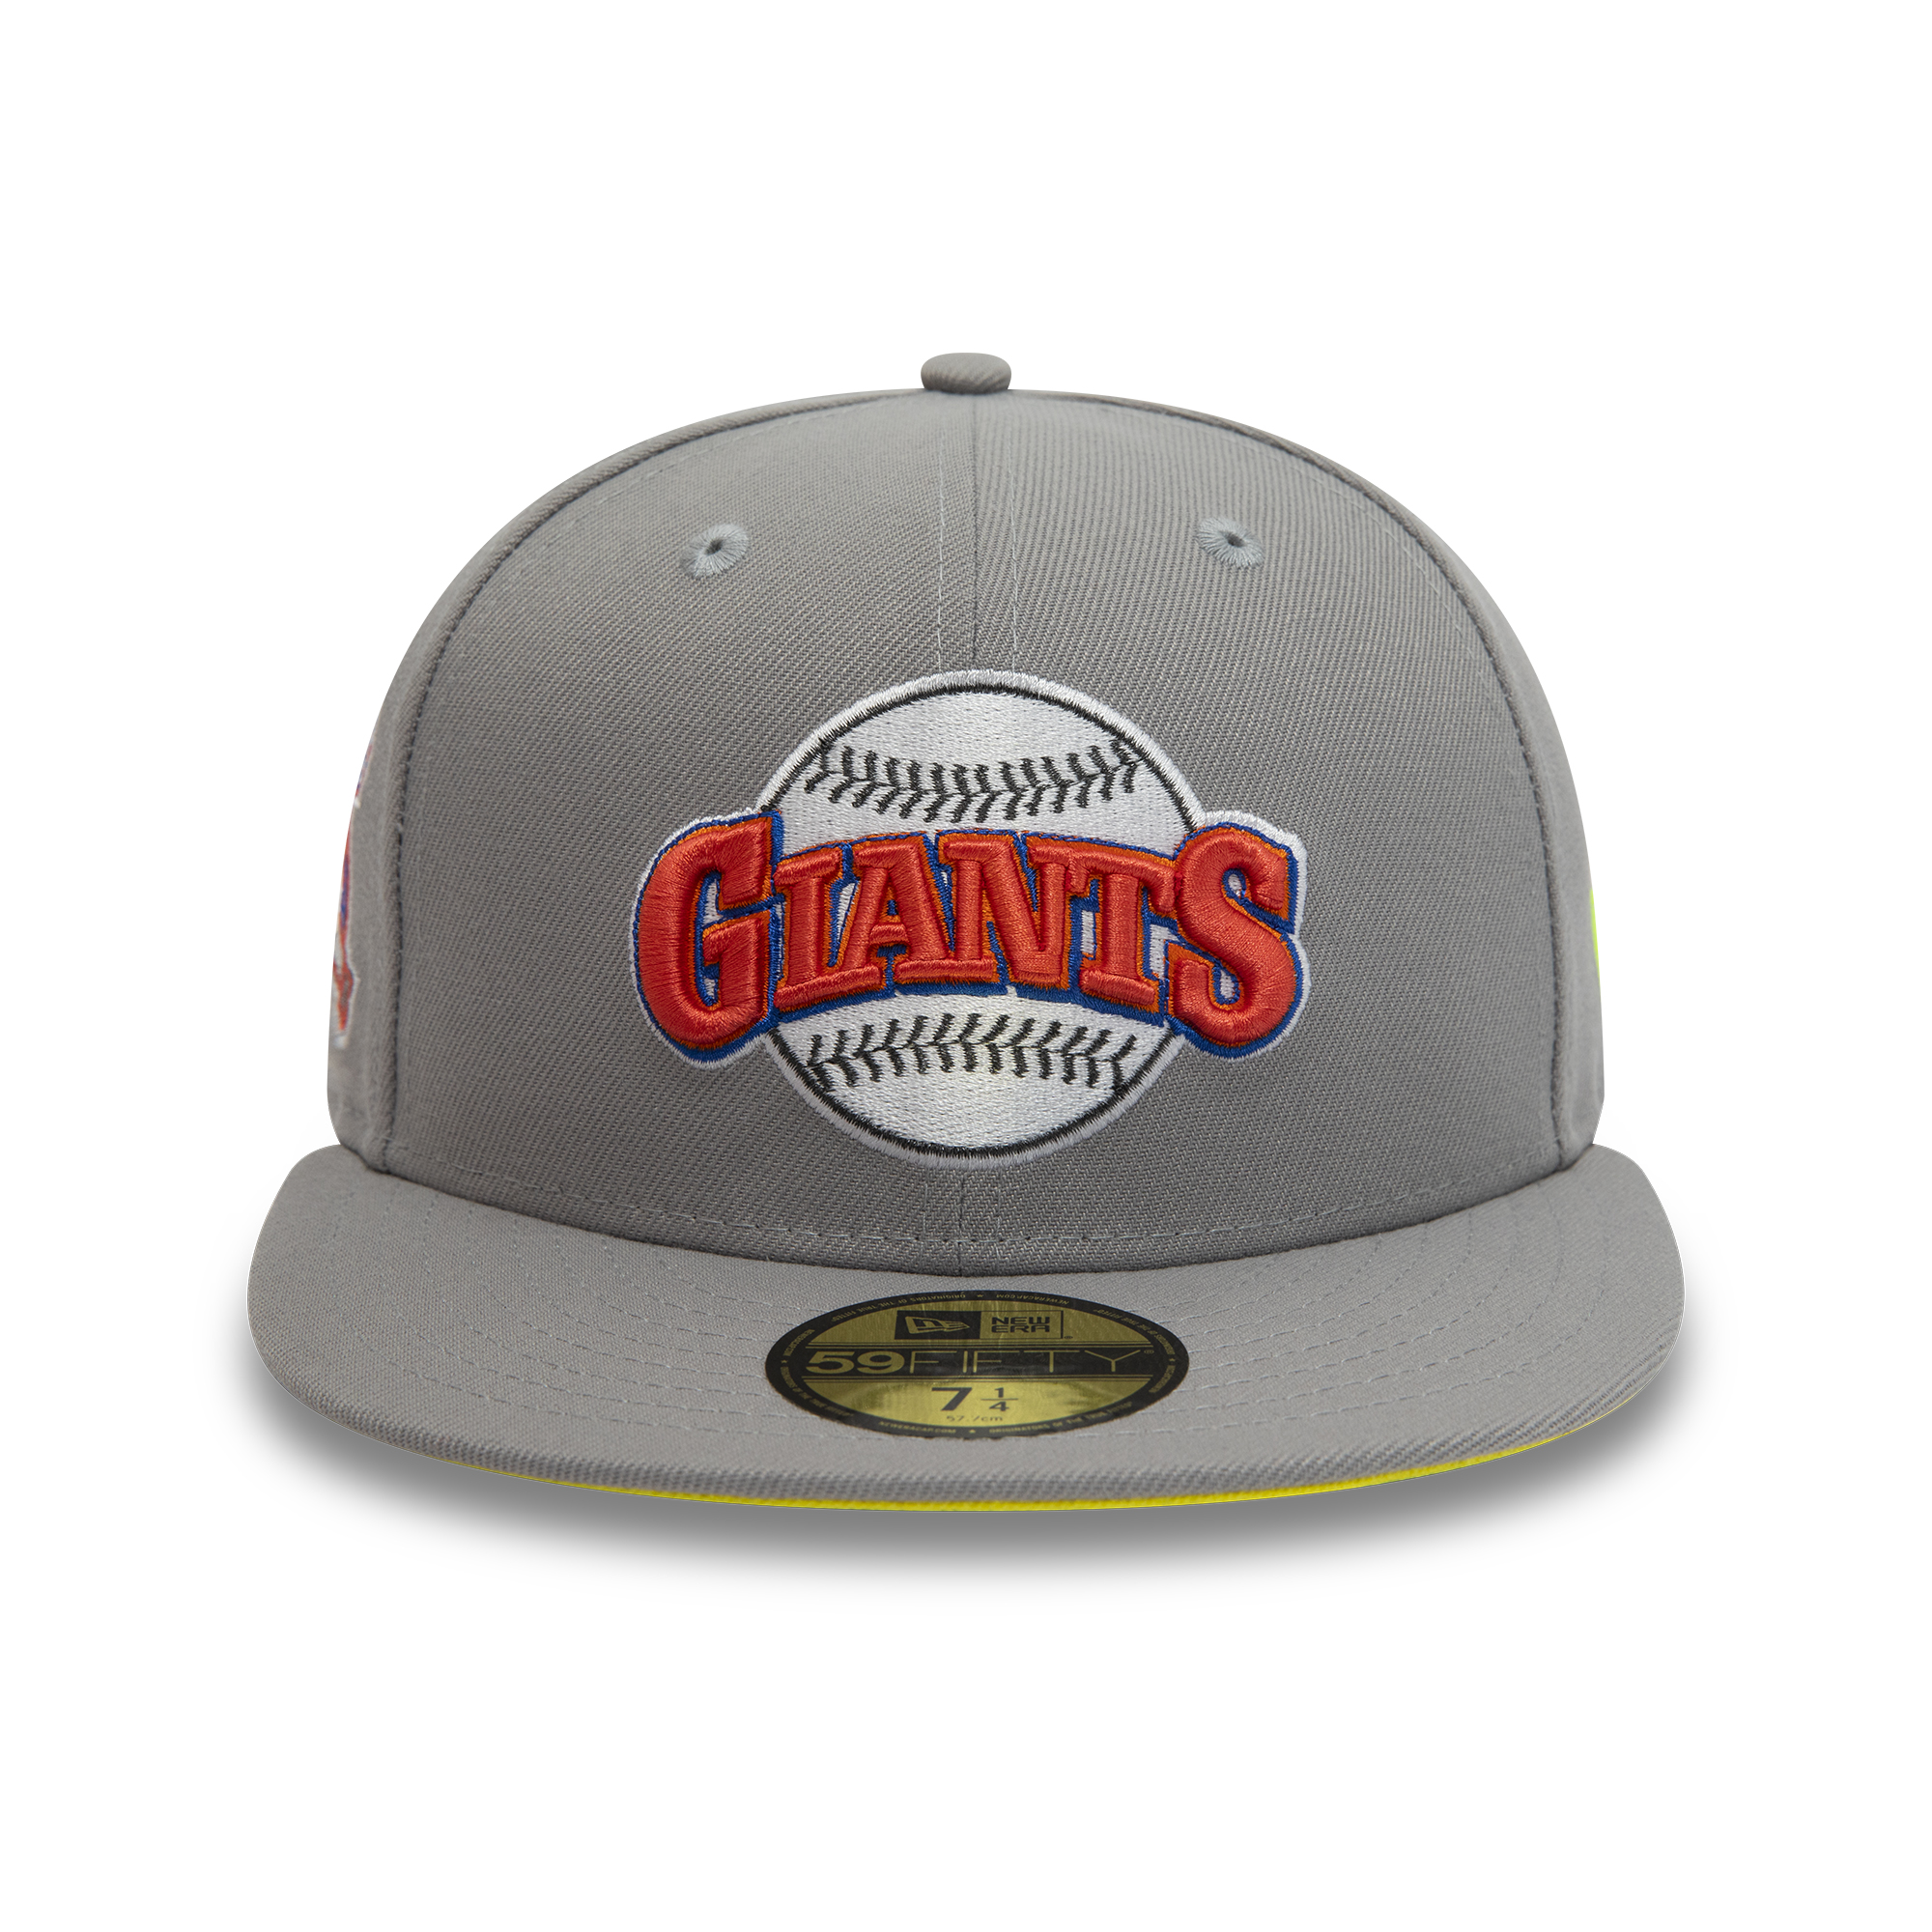 San Francisco Giants 50 Years Grey 59FIFTY Fitted Cap